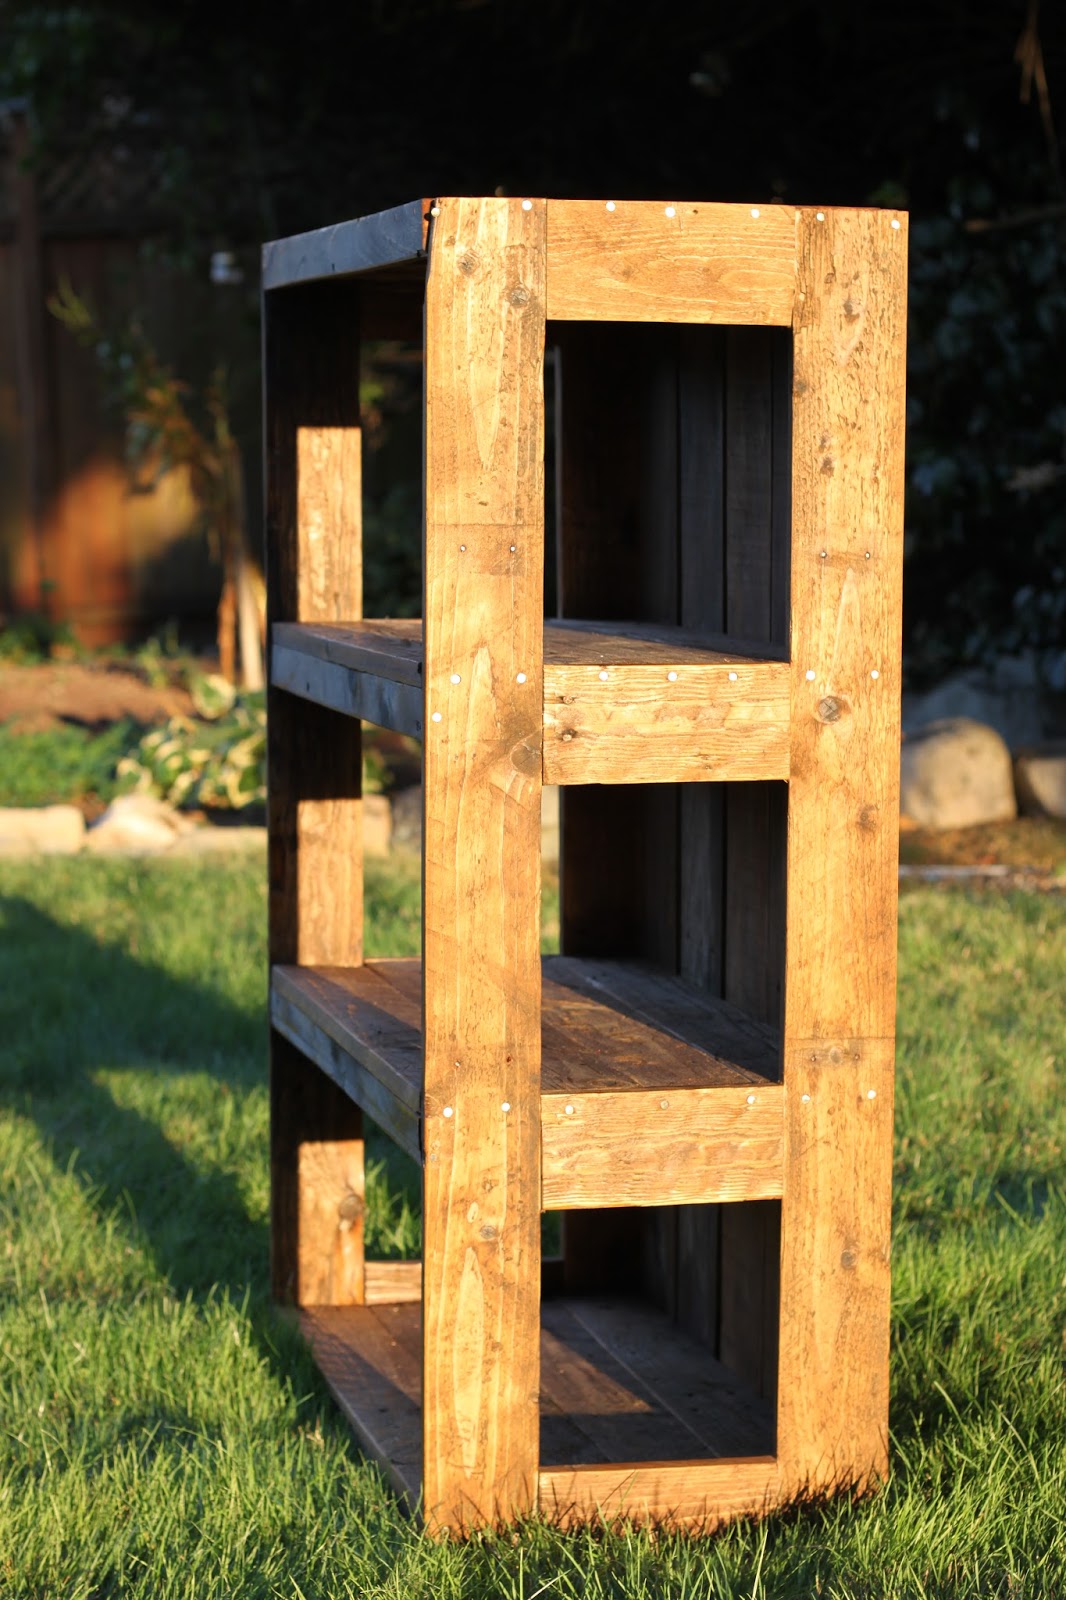 made with love that can be felt : { diy pallet bookshelf }